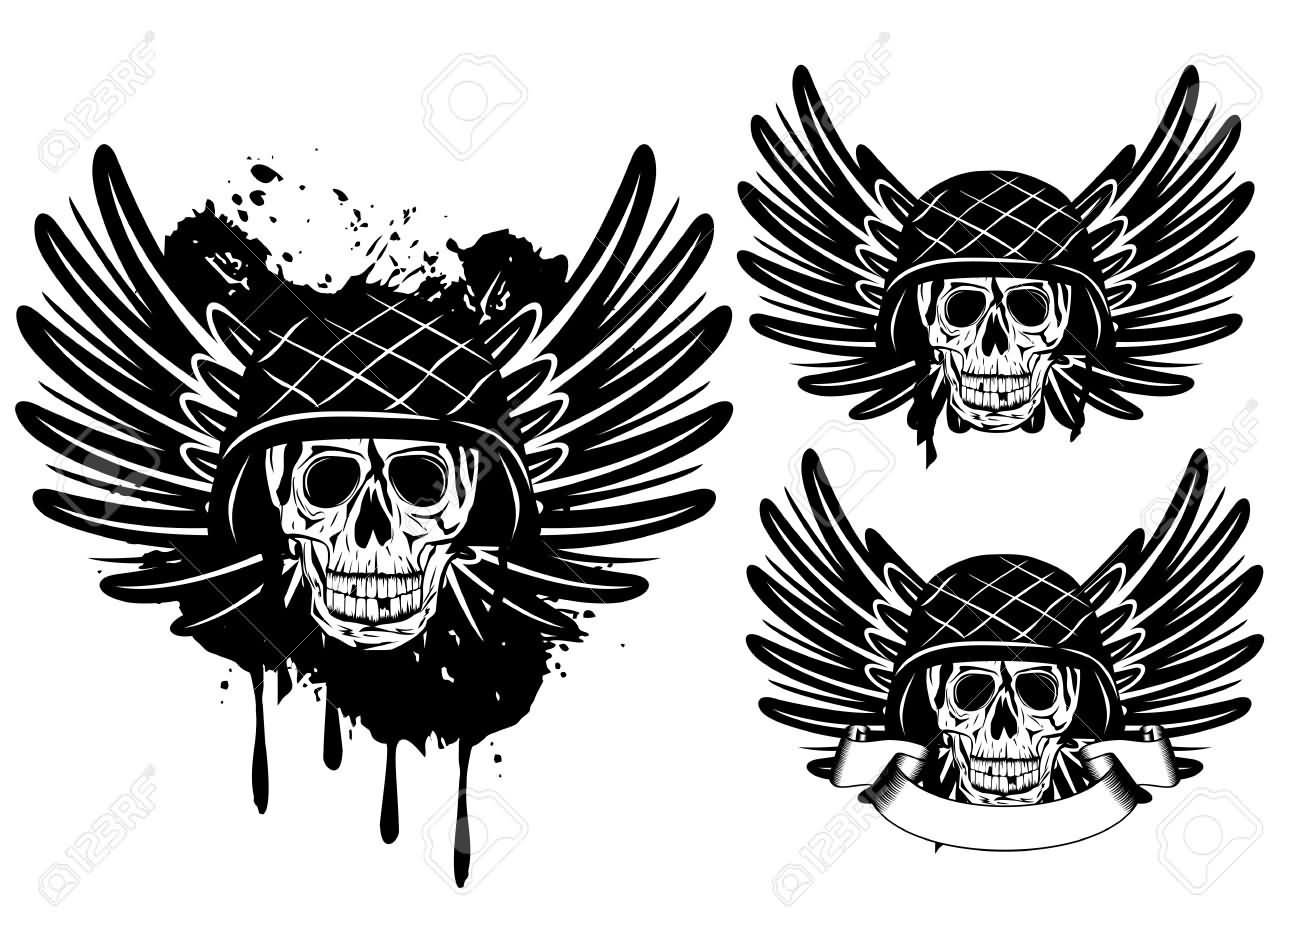 Three Army Skull With Wings Tattoo Design